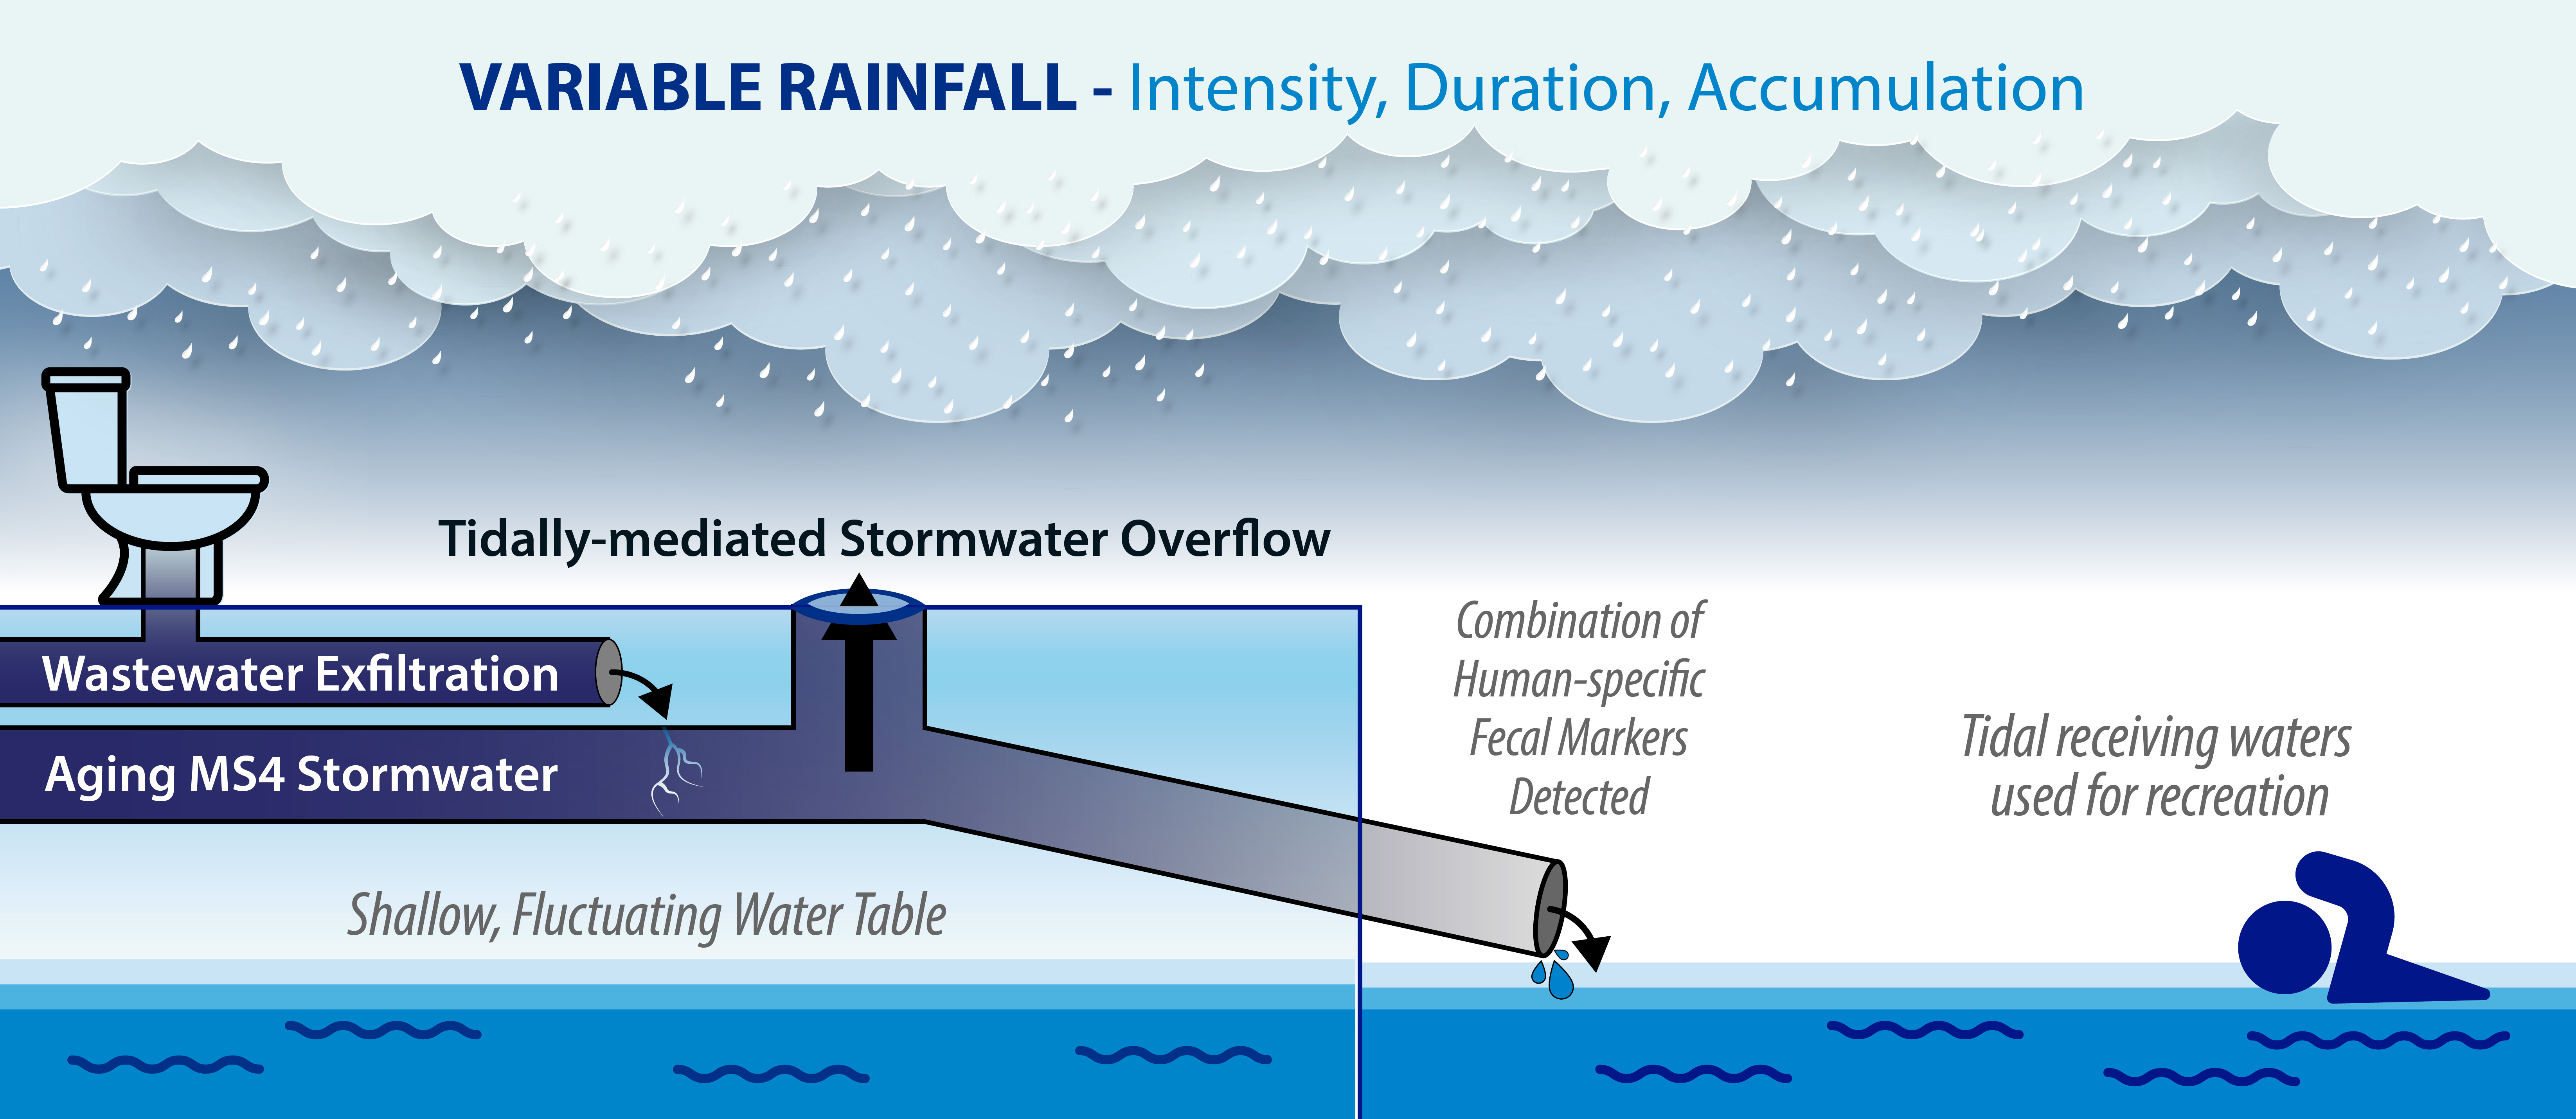 Aging stormwater infrastructure transports polluted wastewater into areas where people swim and boat. Labels include, “Variable rainfall intensity/duration/accumulation,” “Tidally-mediated stormwater overflow,” “Combination of human-specific fecal markers detected,” “Aging stormwater infrastructure,” “Shallow, fluctuating water table,” and “Tidal receiving waters used for recreation.”